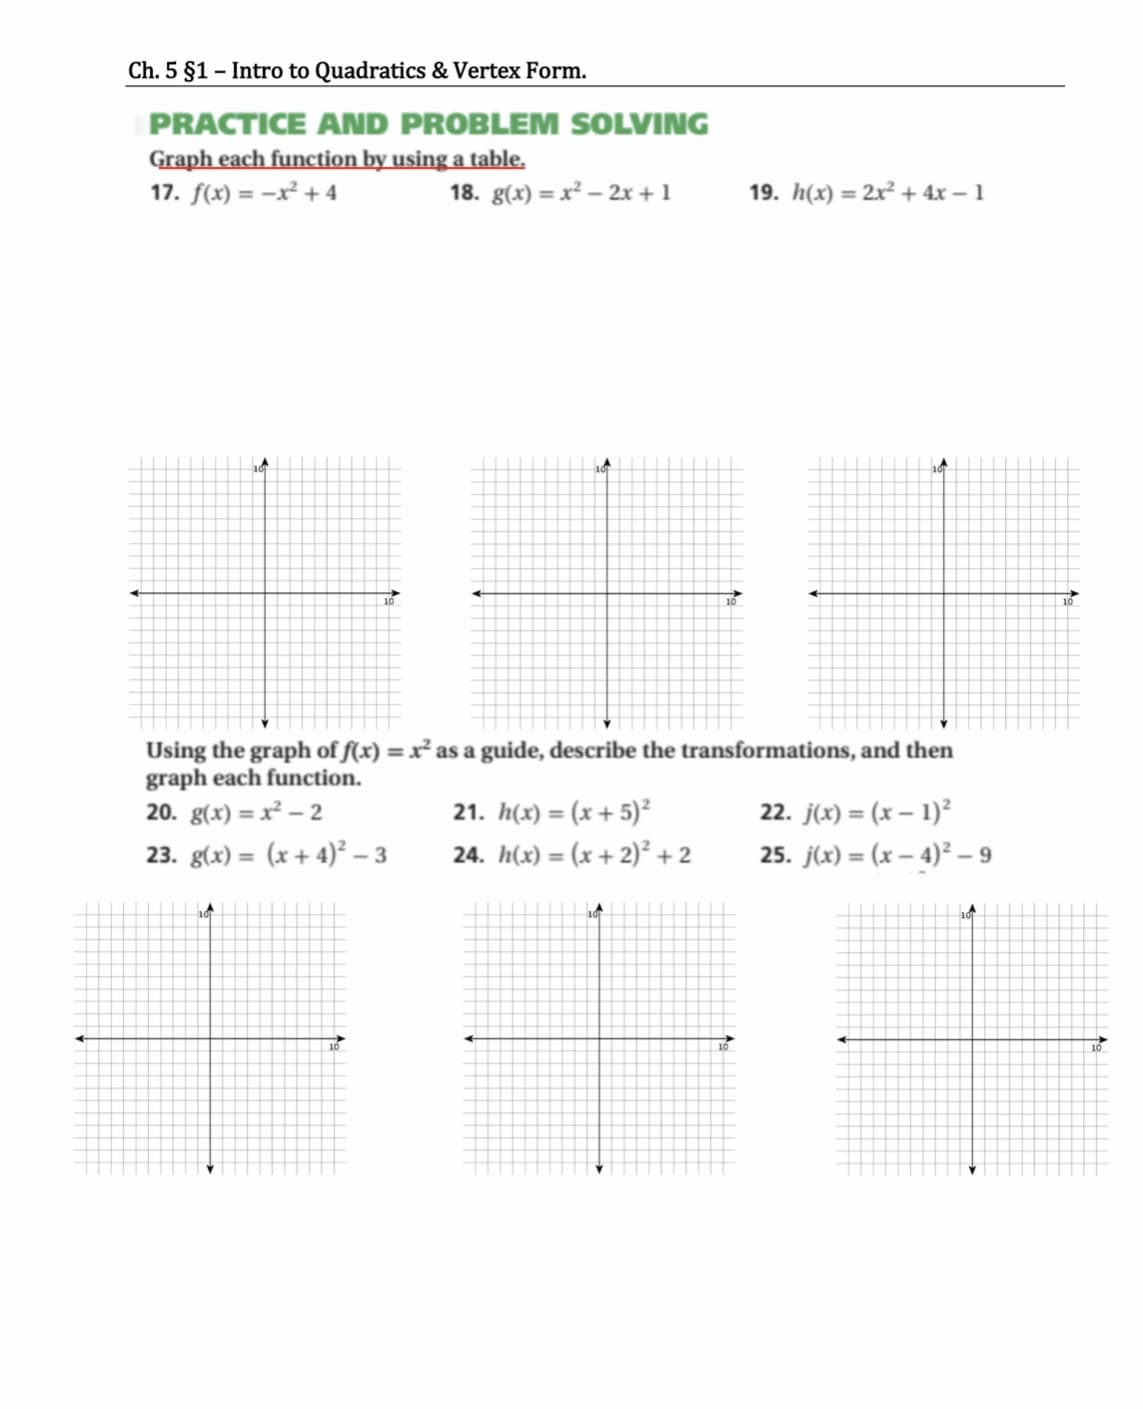 Ch. 5 §1 – Intro to Quadratics & Vertex Form.
PRACTICE AND PROBLEM SOLVING
Graph each function by using a table.
17. f(x) = -x² + 4
18. g(x) = x² – 2x + 1
19. h(x) = 2x² + 4x – 1
10
Using the graph of f(x) = x² as a guide, describe the transformations, and then
graph each function.
20. g(x) = x² –- 2
%3D
21. h(x) = (x+ 5)²
24. h(x) = (x + 2)² + 2
22. j(x) = (x – 1)²
%3D
23. g(x) = (x + 4)² – 3
25. j(x) = (x – 4)² – 9
%3D
%3D
